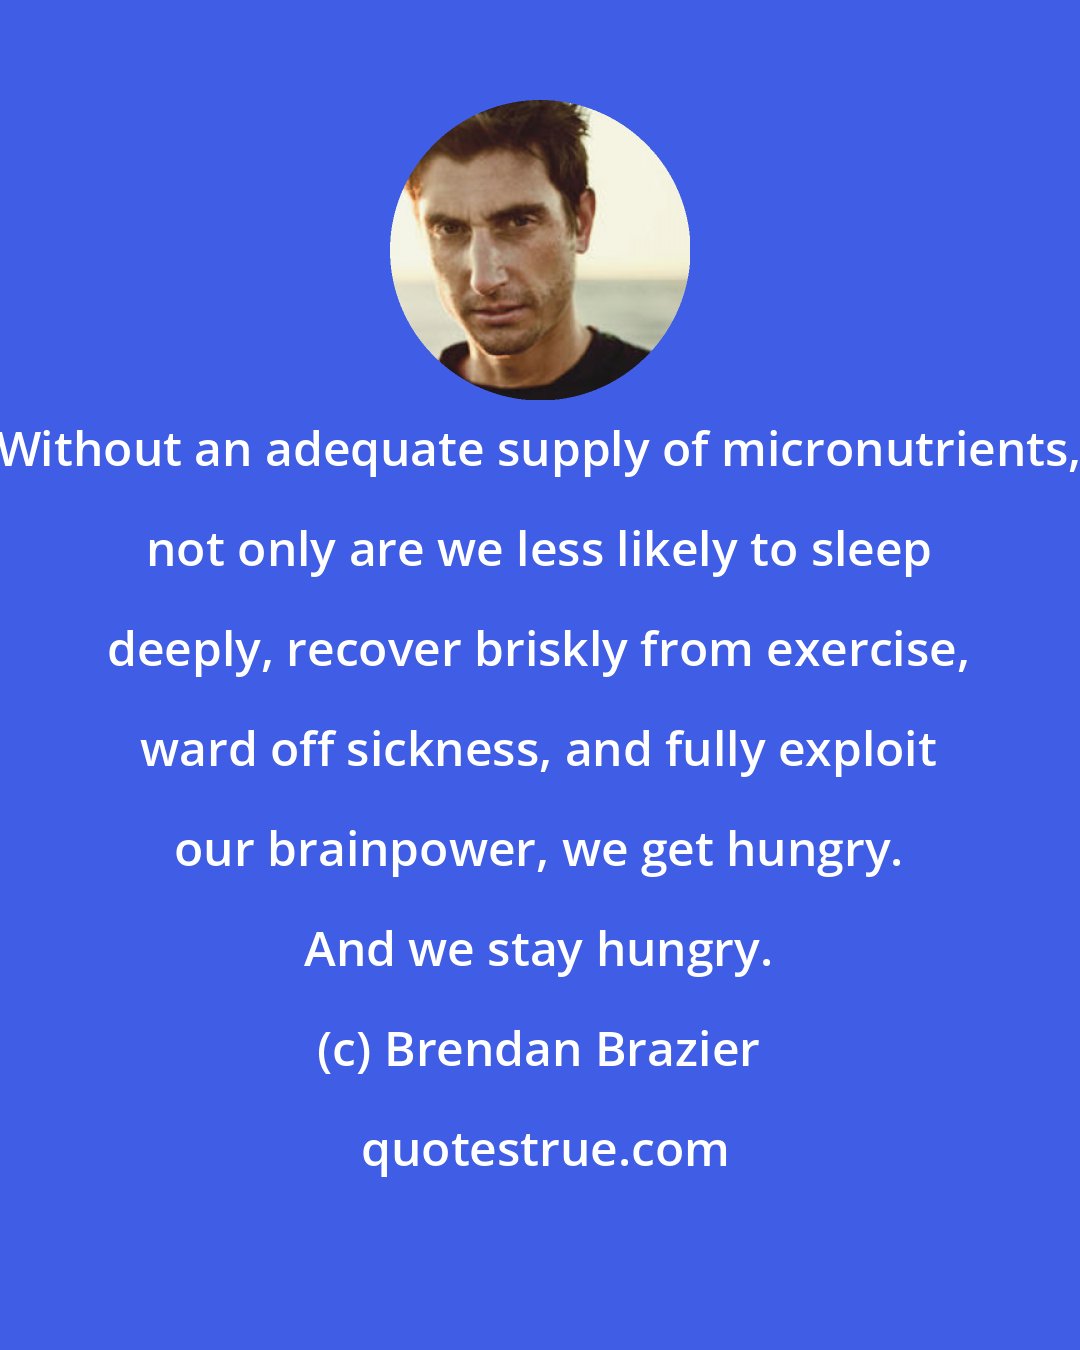 Brendan Brazier: Without an adequate supply of micronutrients, not only are we less likely to sleep deeply, recover briskly from exercise, ward off sickness, and fully exploit our brainpower, we get hungry. And we stay hungry.